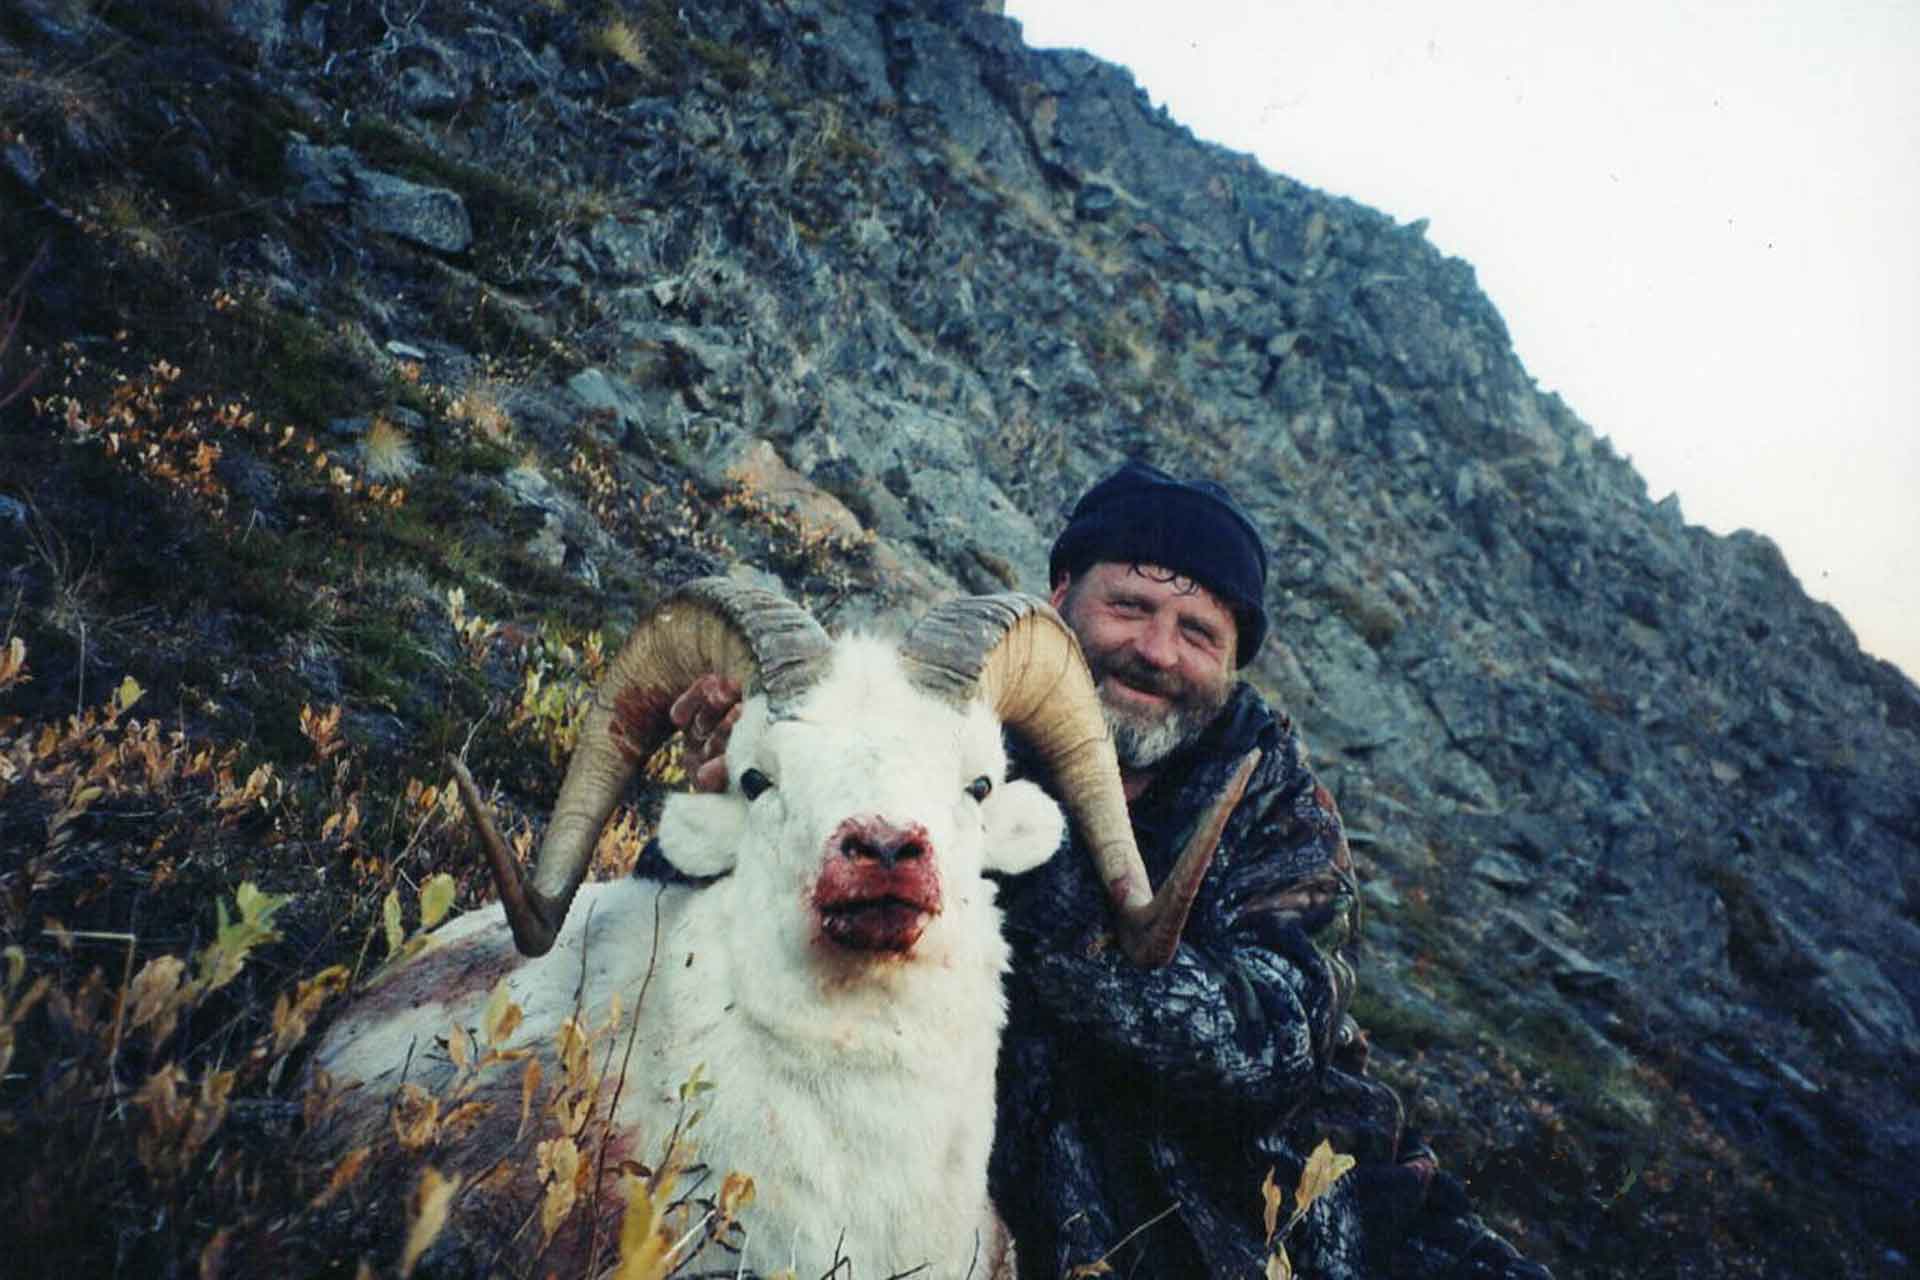 An Alaskan Sheep Hunt Turns Into the Hike from Hell Outdoor Life